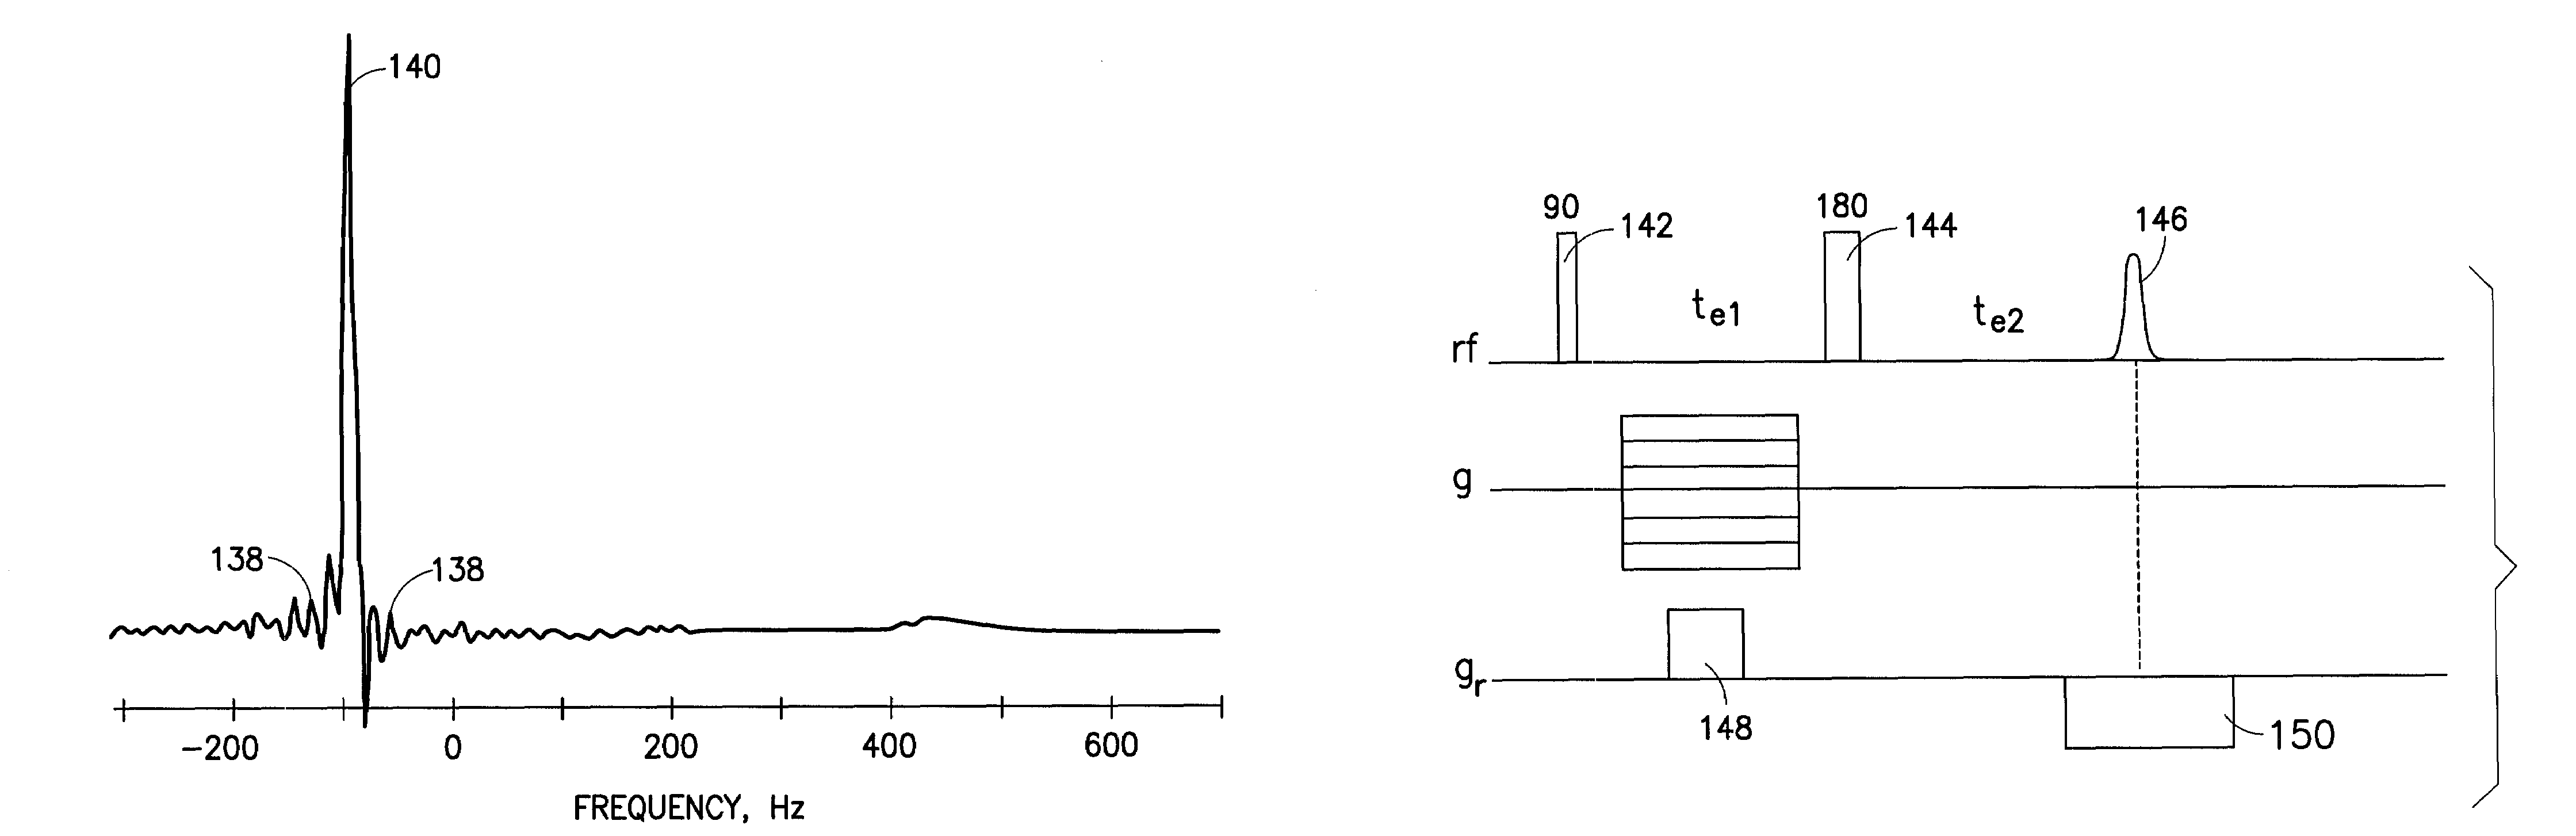 Method and apparatus to improve NMR spectral resolution in an inhomogeneous magnetic field